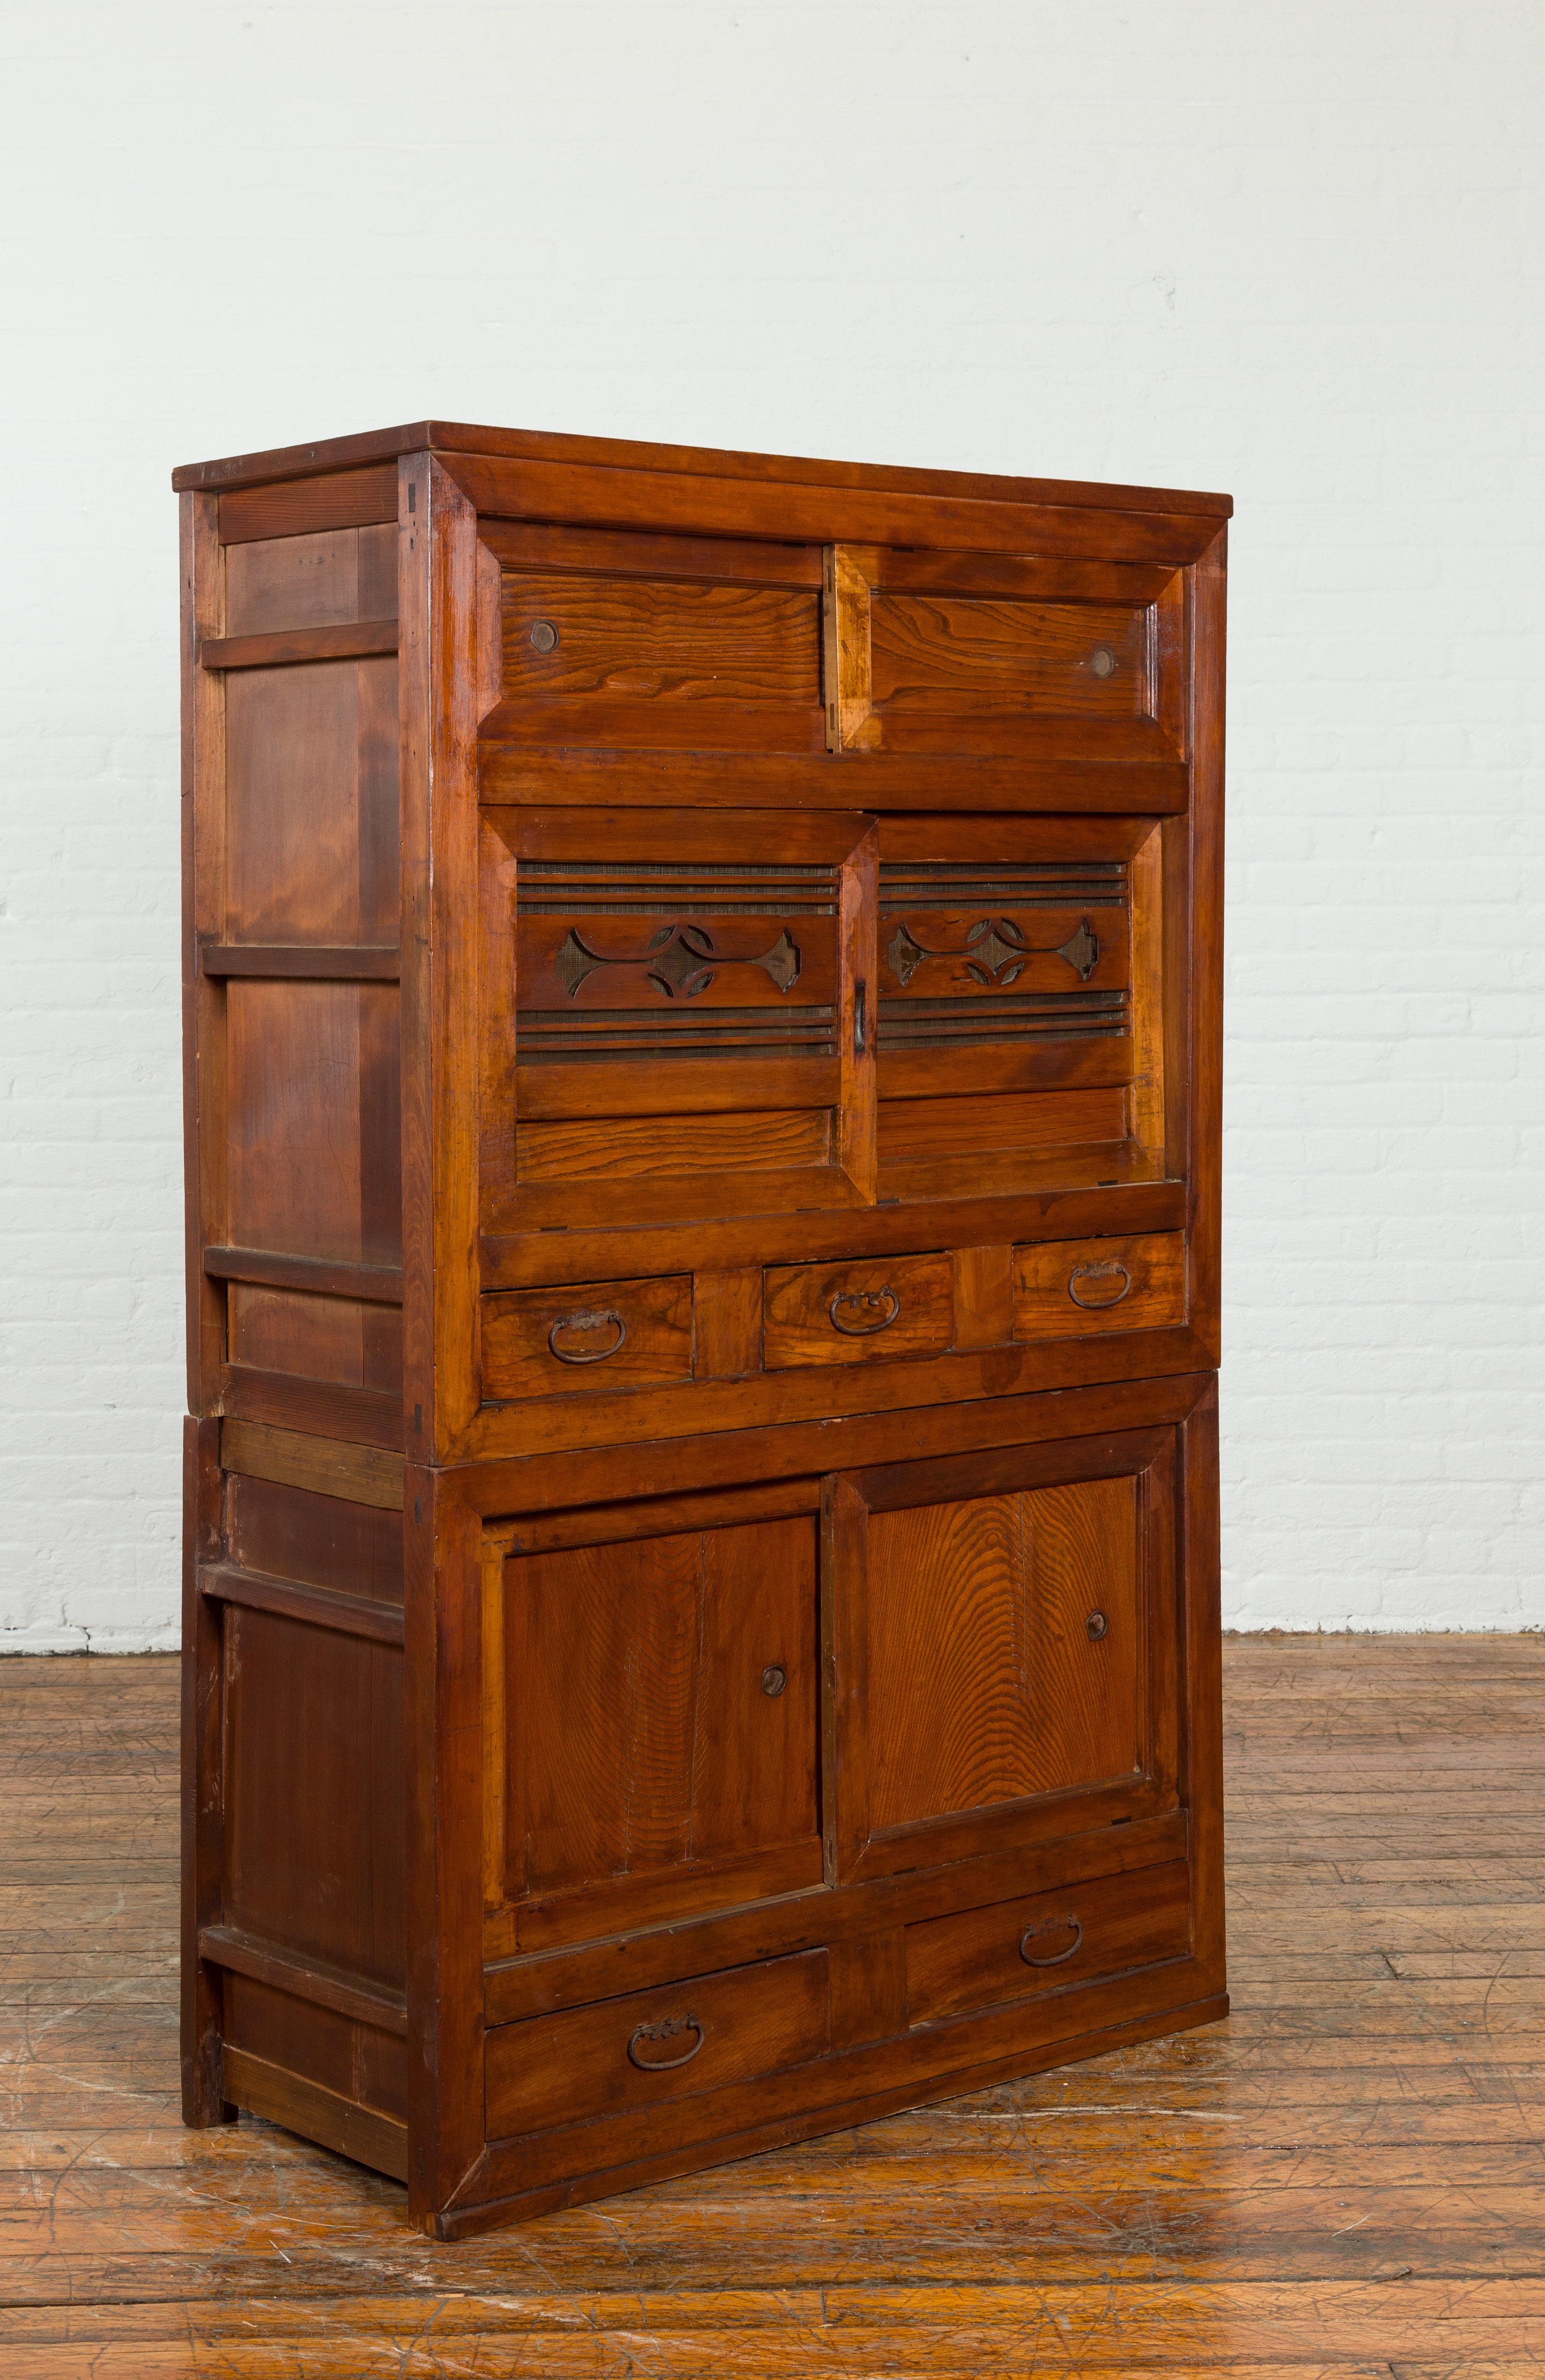 Taisho Japanese Early 20th Century Kitchen Tansu Cabinet with Sliding Doors and Drawers